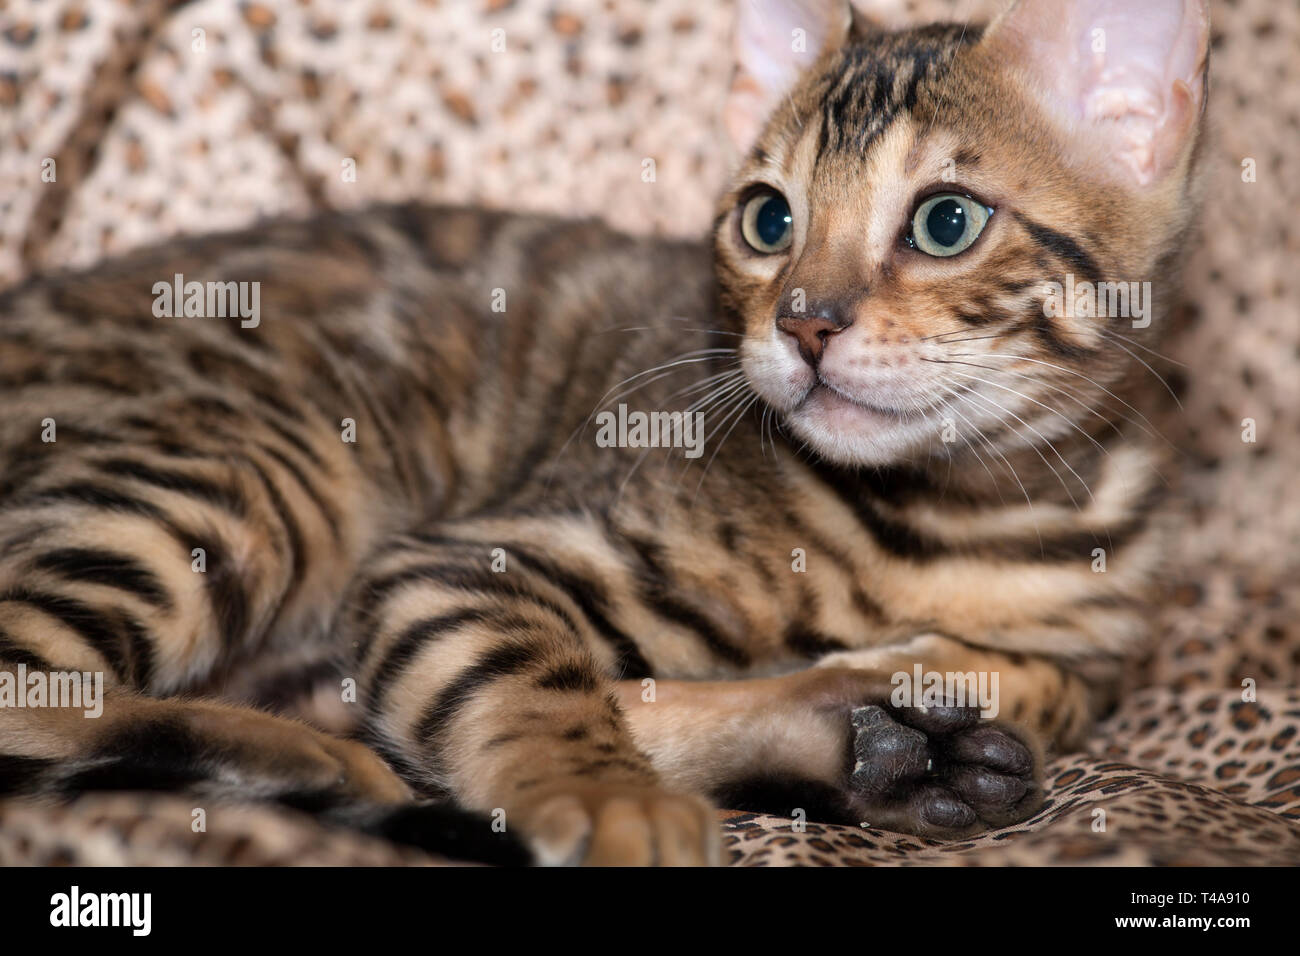 Purebred bengal kitten lying on a leopard print background. Stock Photo